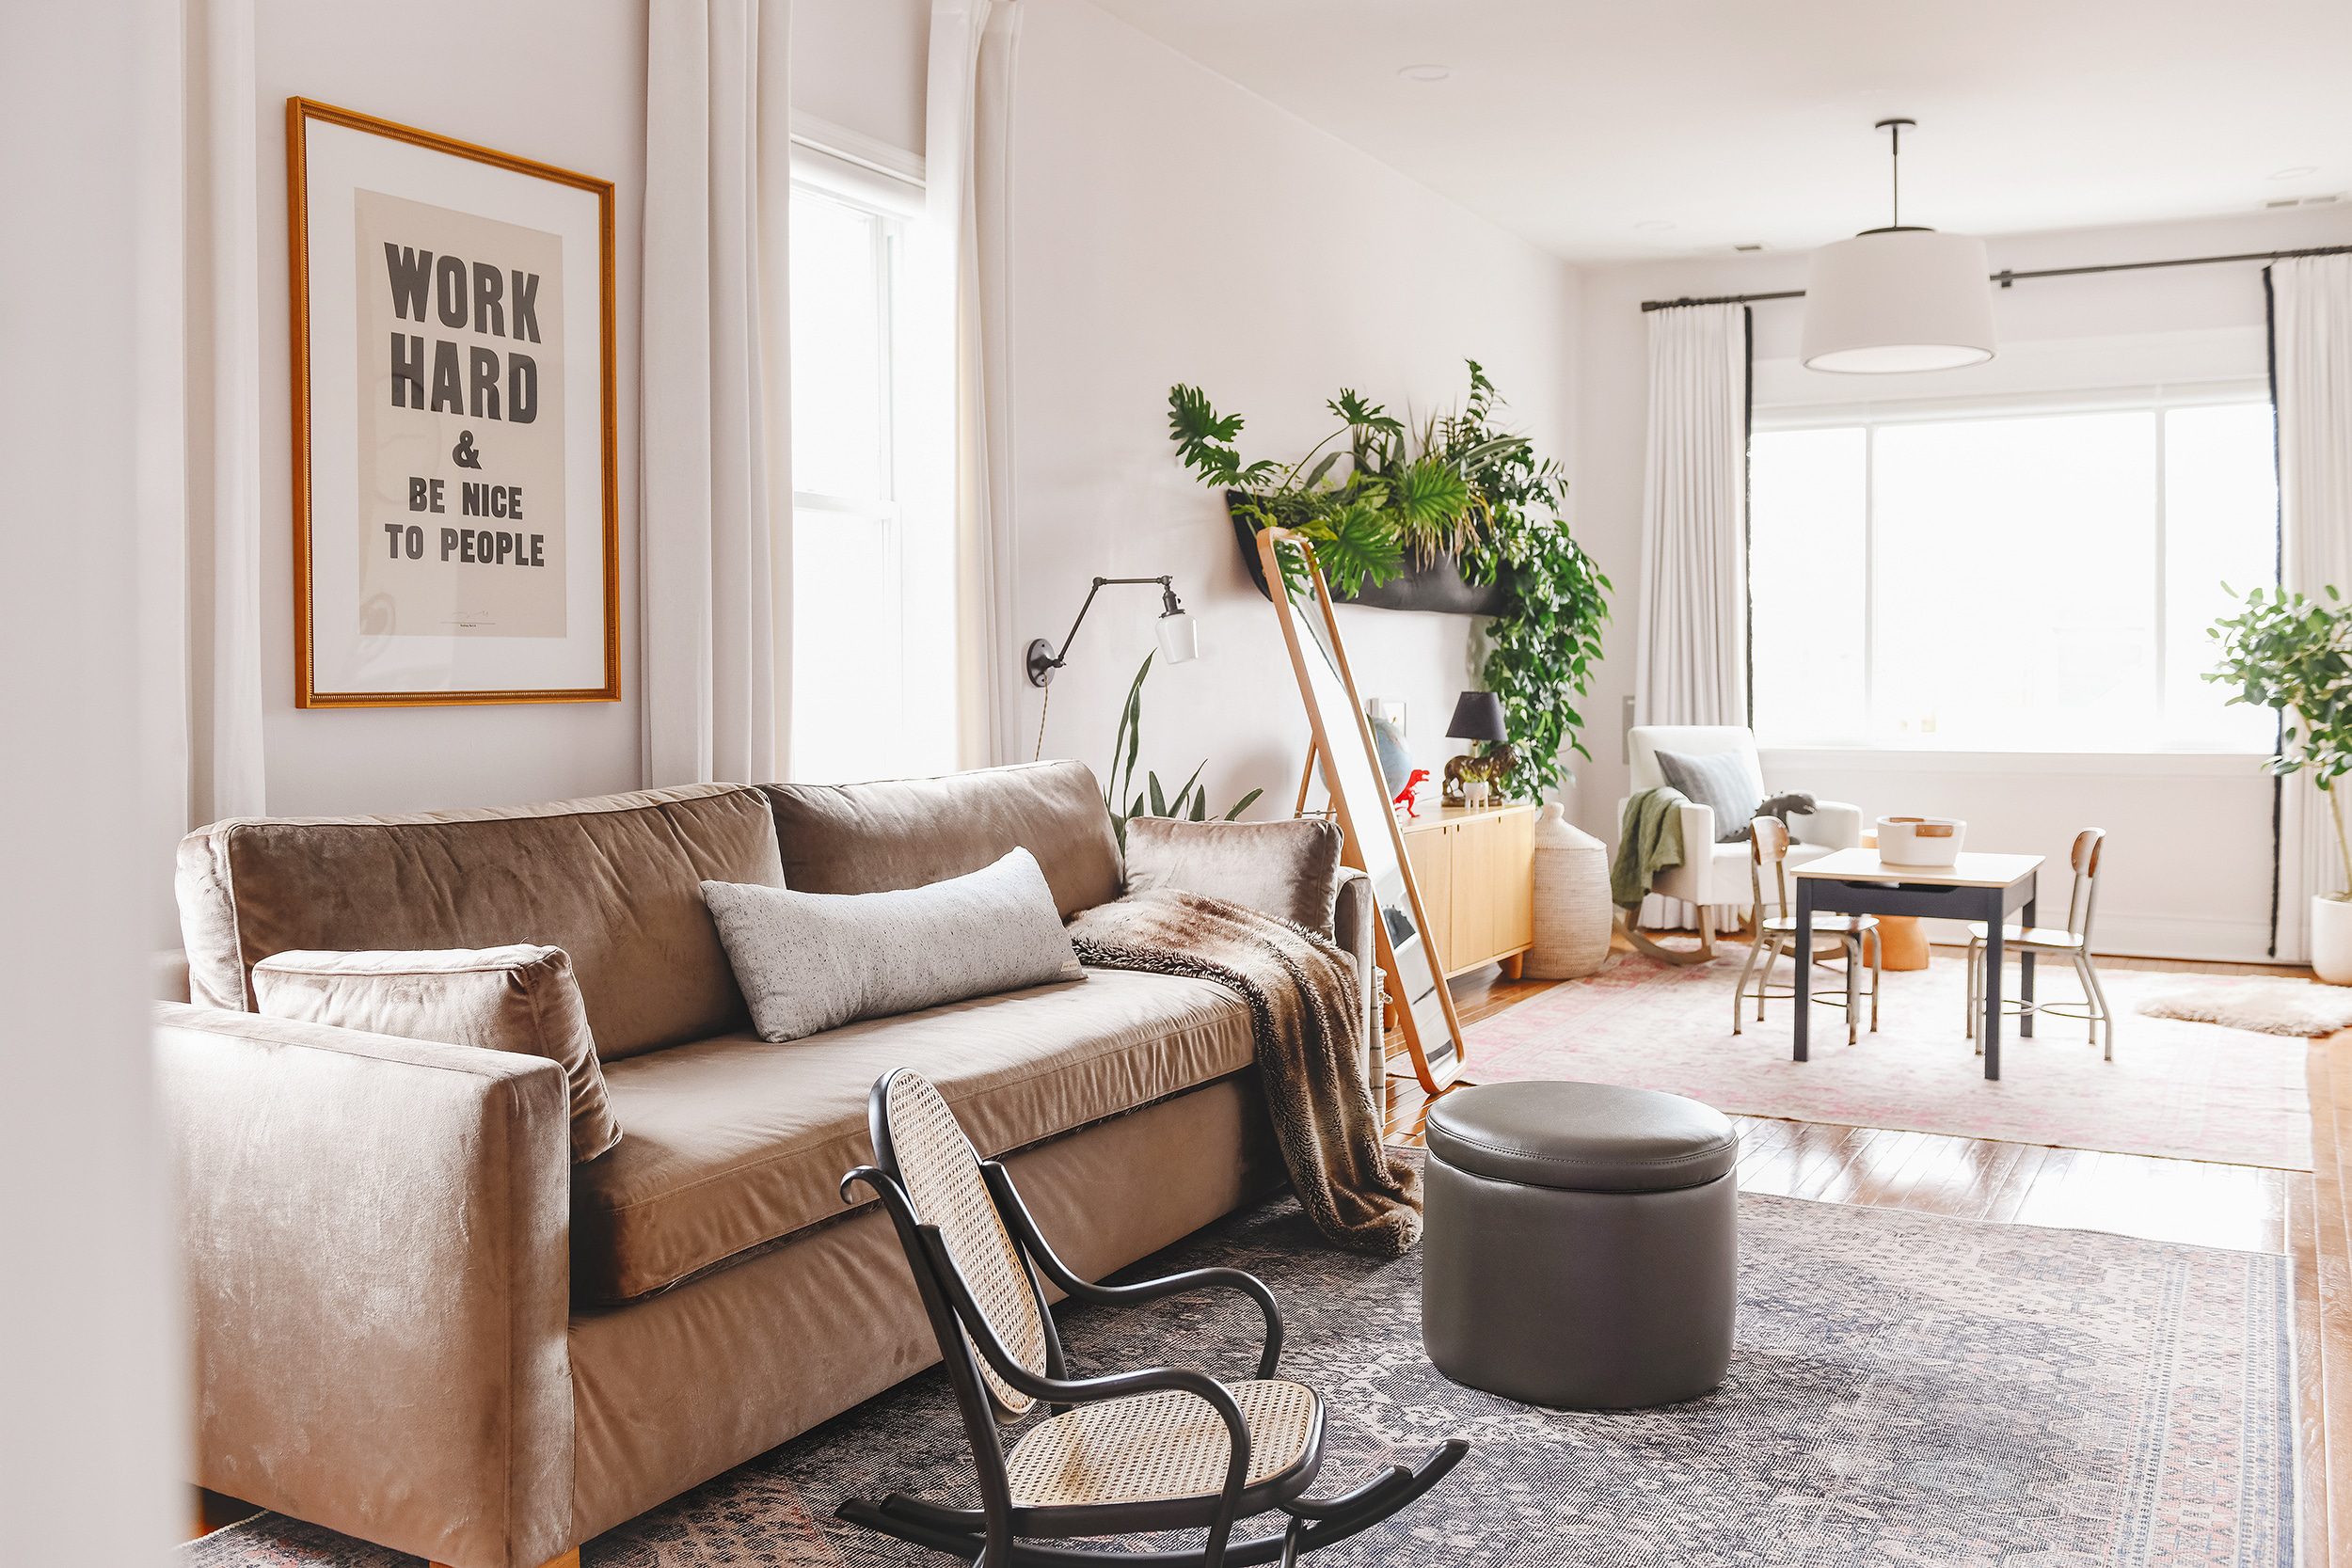 A view into our family room with an art print that says 'Work Hard & Be Nice to People' | via Yellow Brick Home